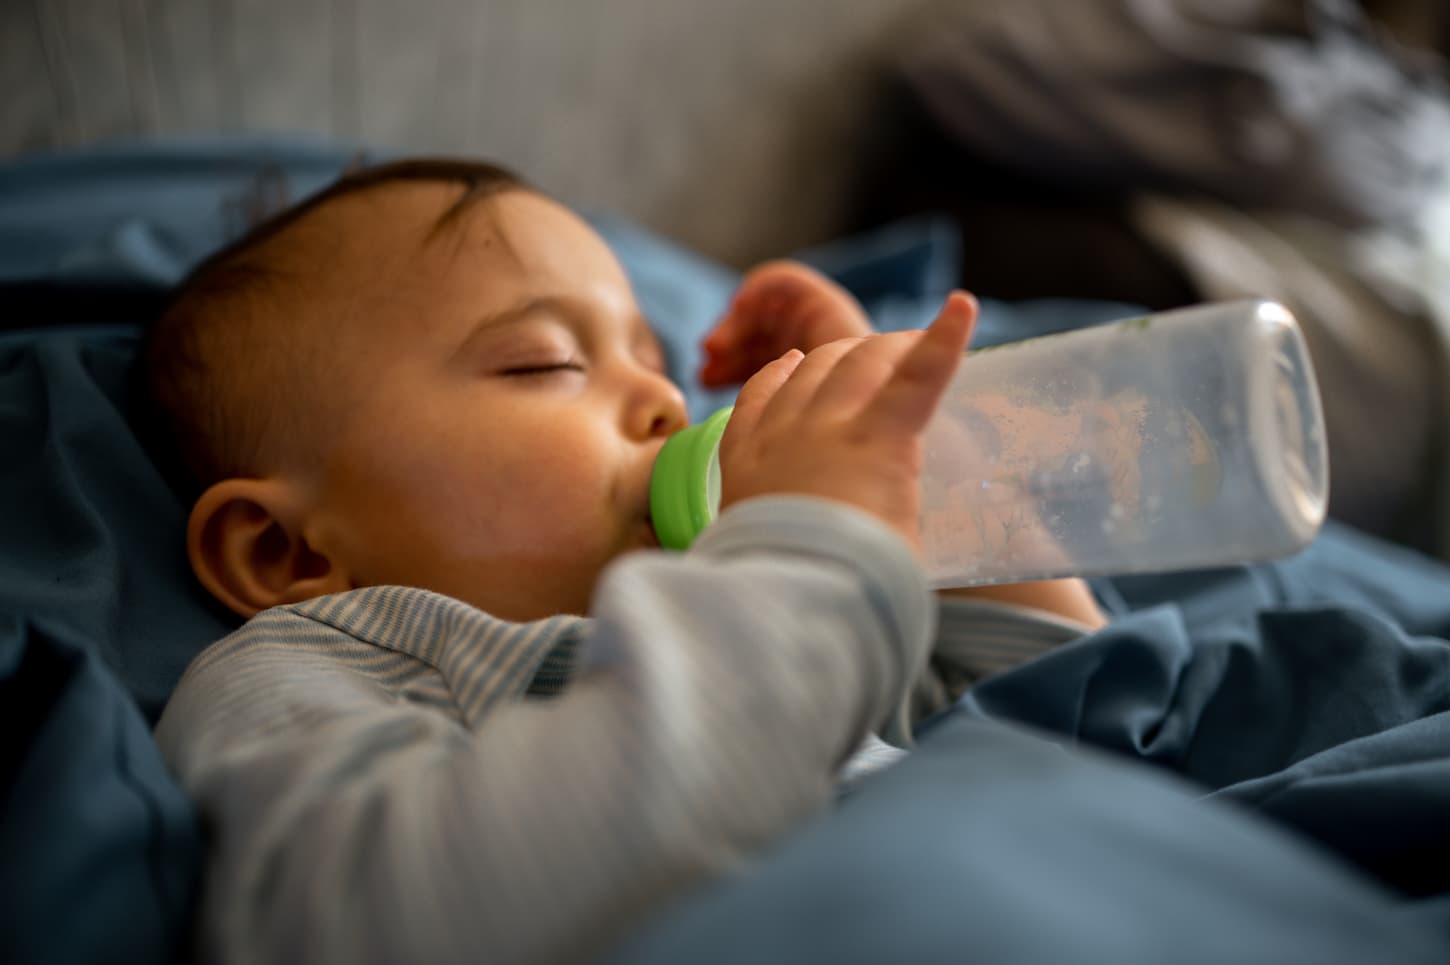 An image of a sleeping baby with a bottle in his hands.